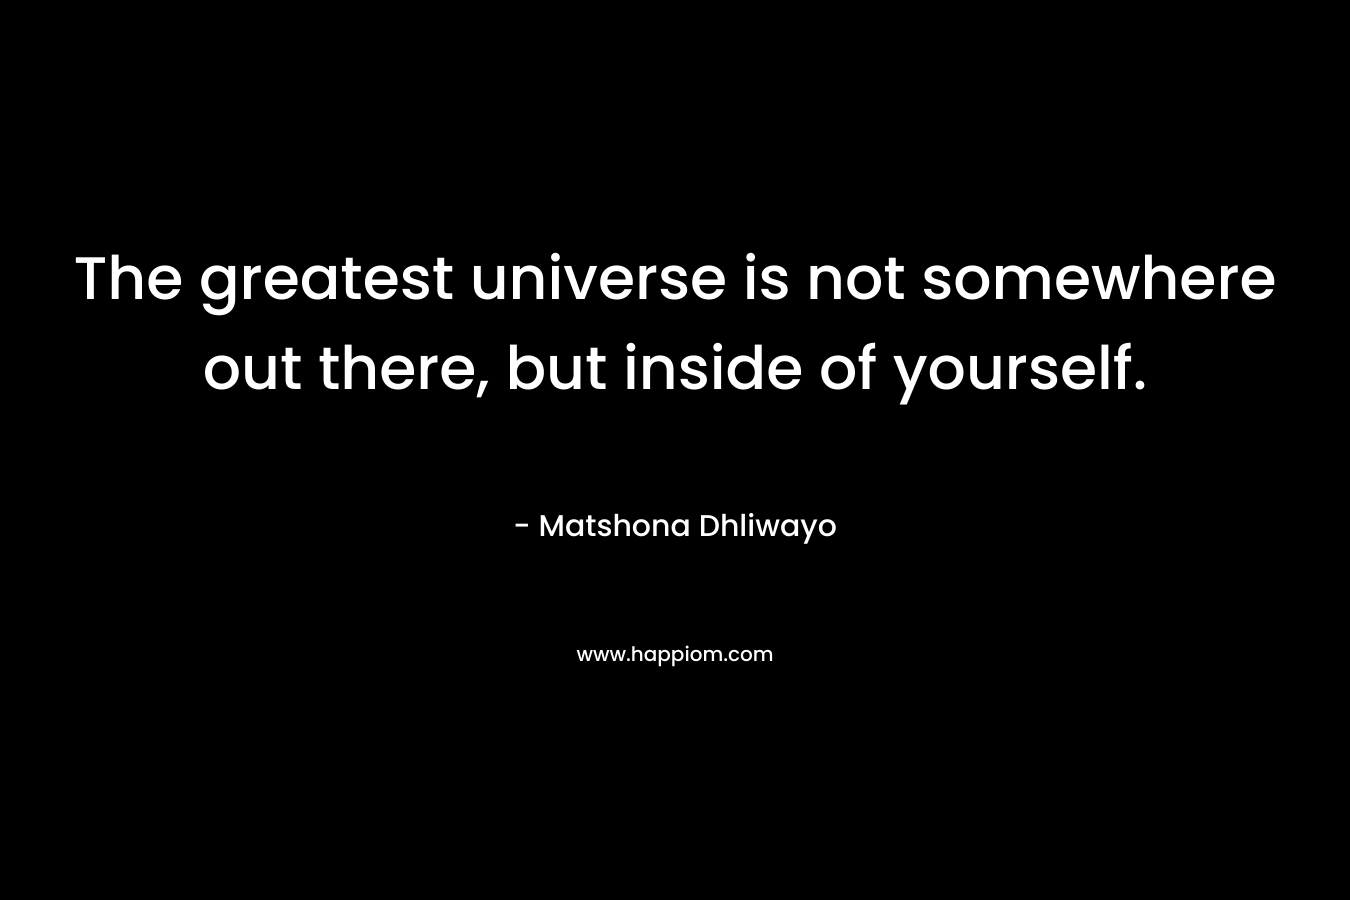 The greatest universe is not somewhere out there, but inside of yourself.